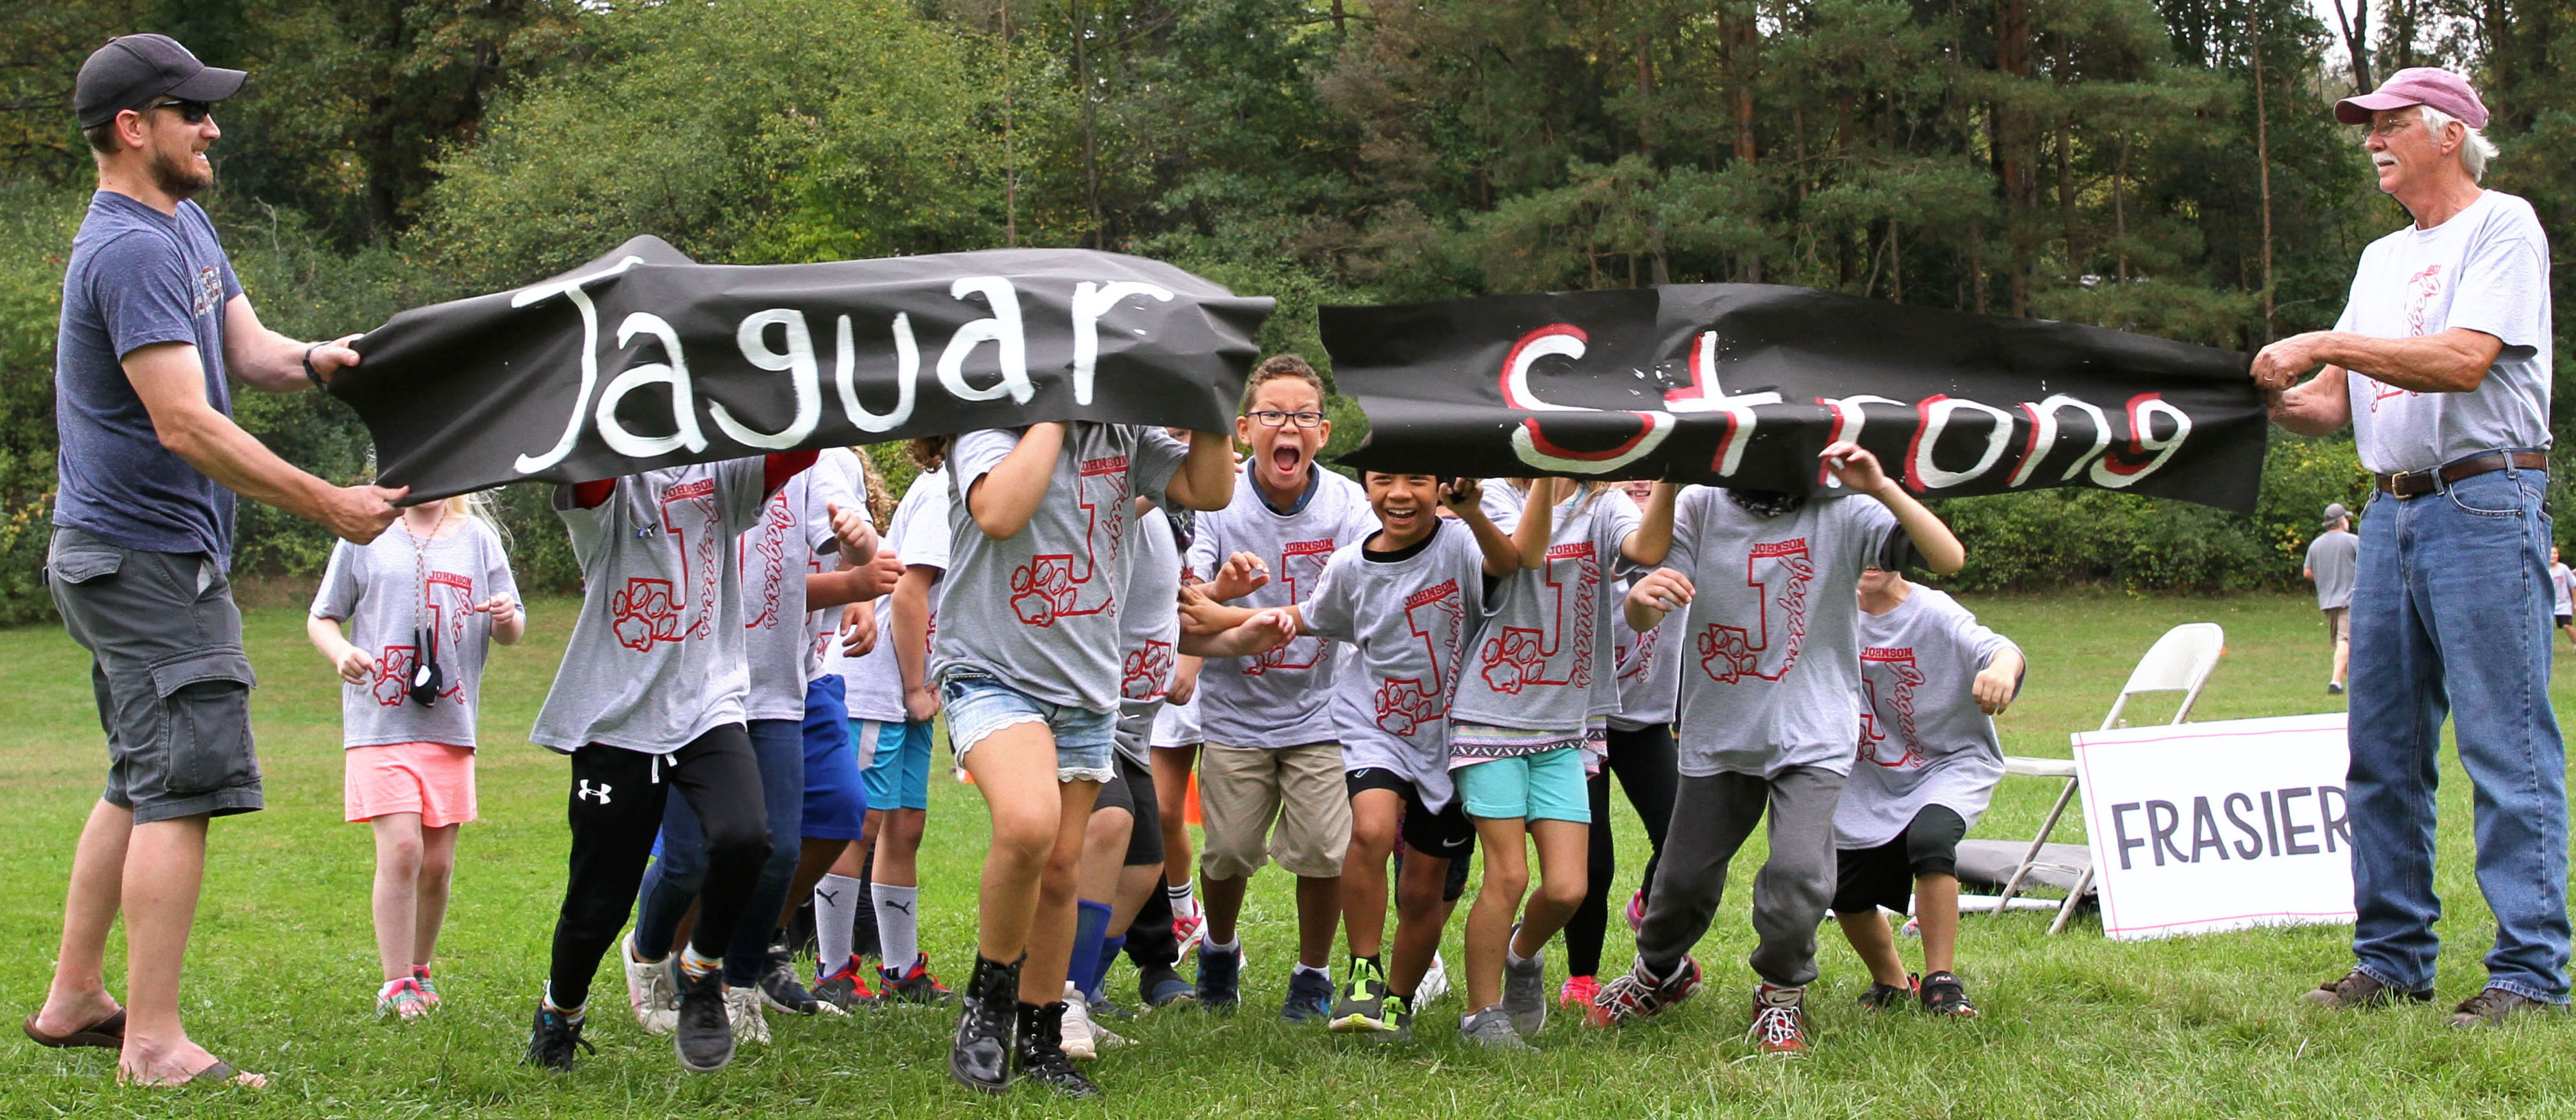 children and adults holding paper sign that says "jaguar strong" for fun run